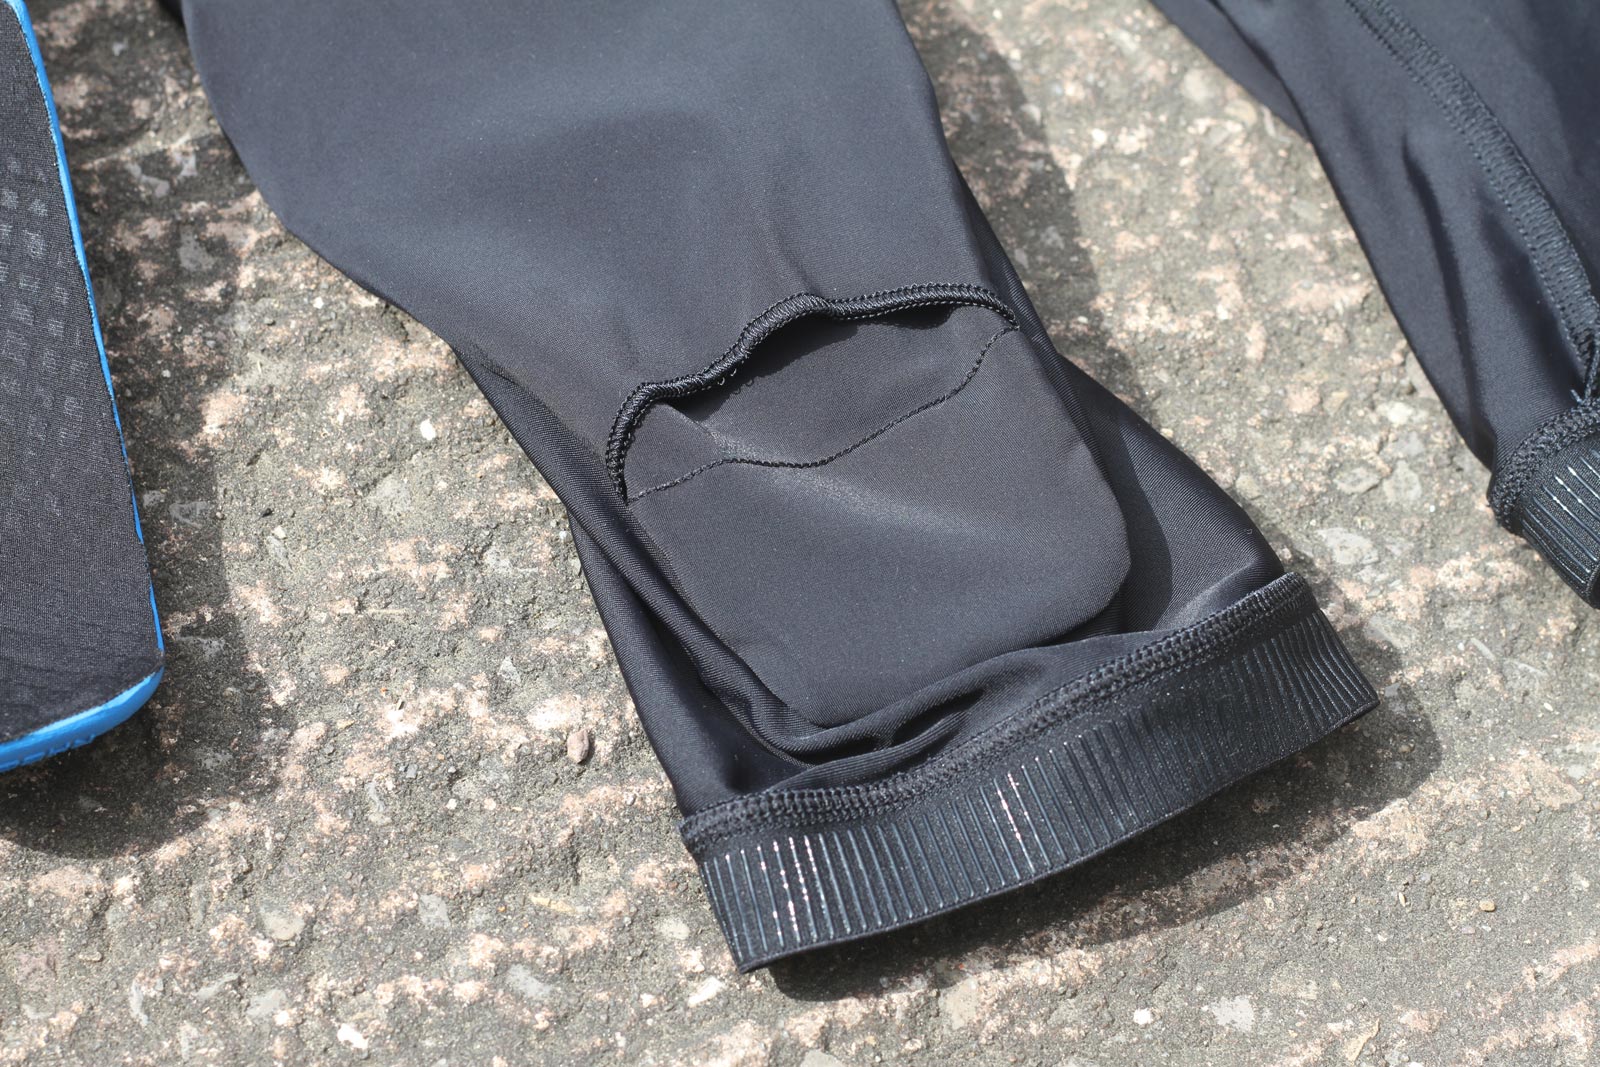 rapha trail knee pad review smooth 4-way stretch fabric thin breathable comofrtable removable pad for washing